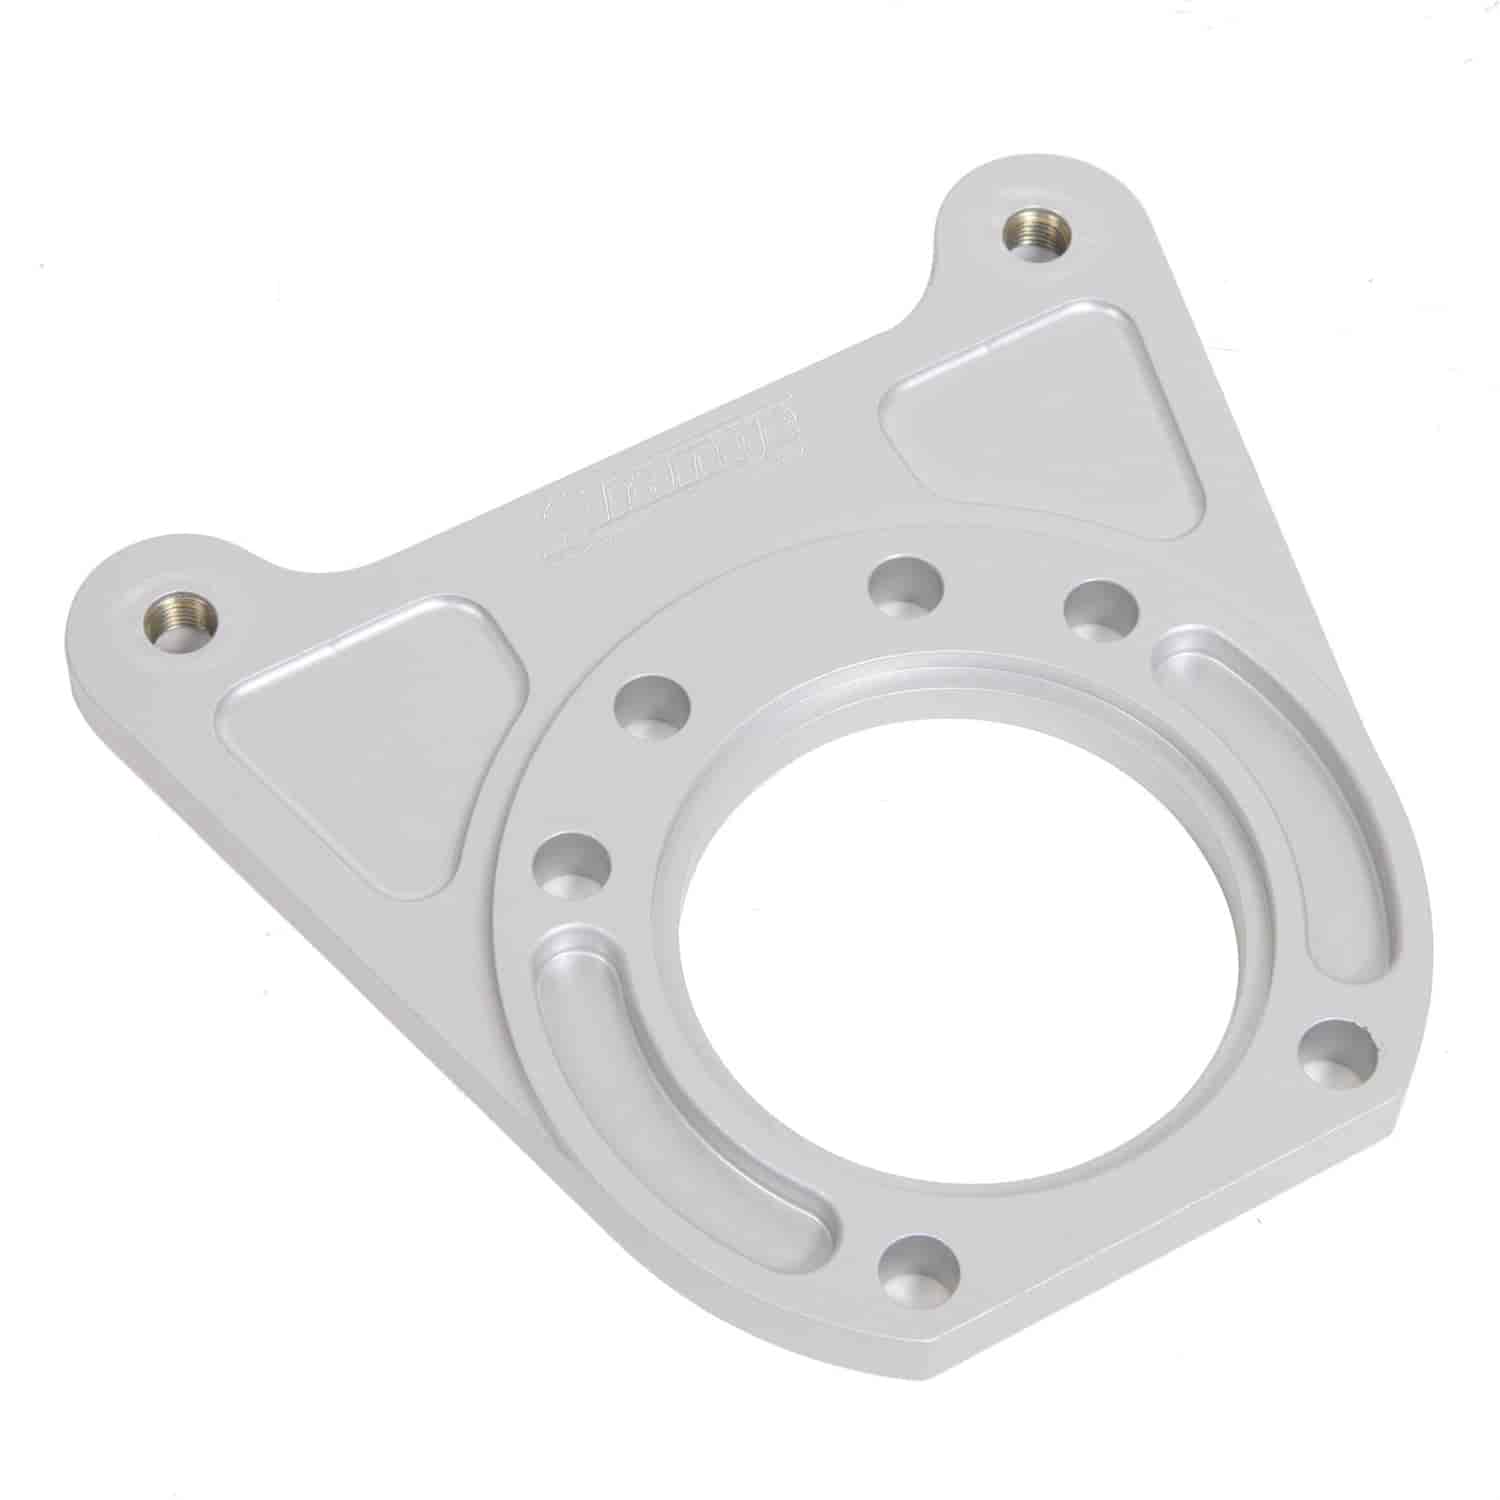 Dual Disc Brake Caliper Bracket [For Use With